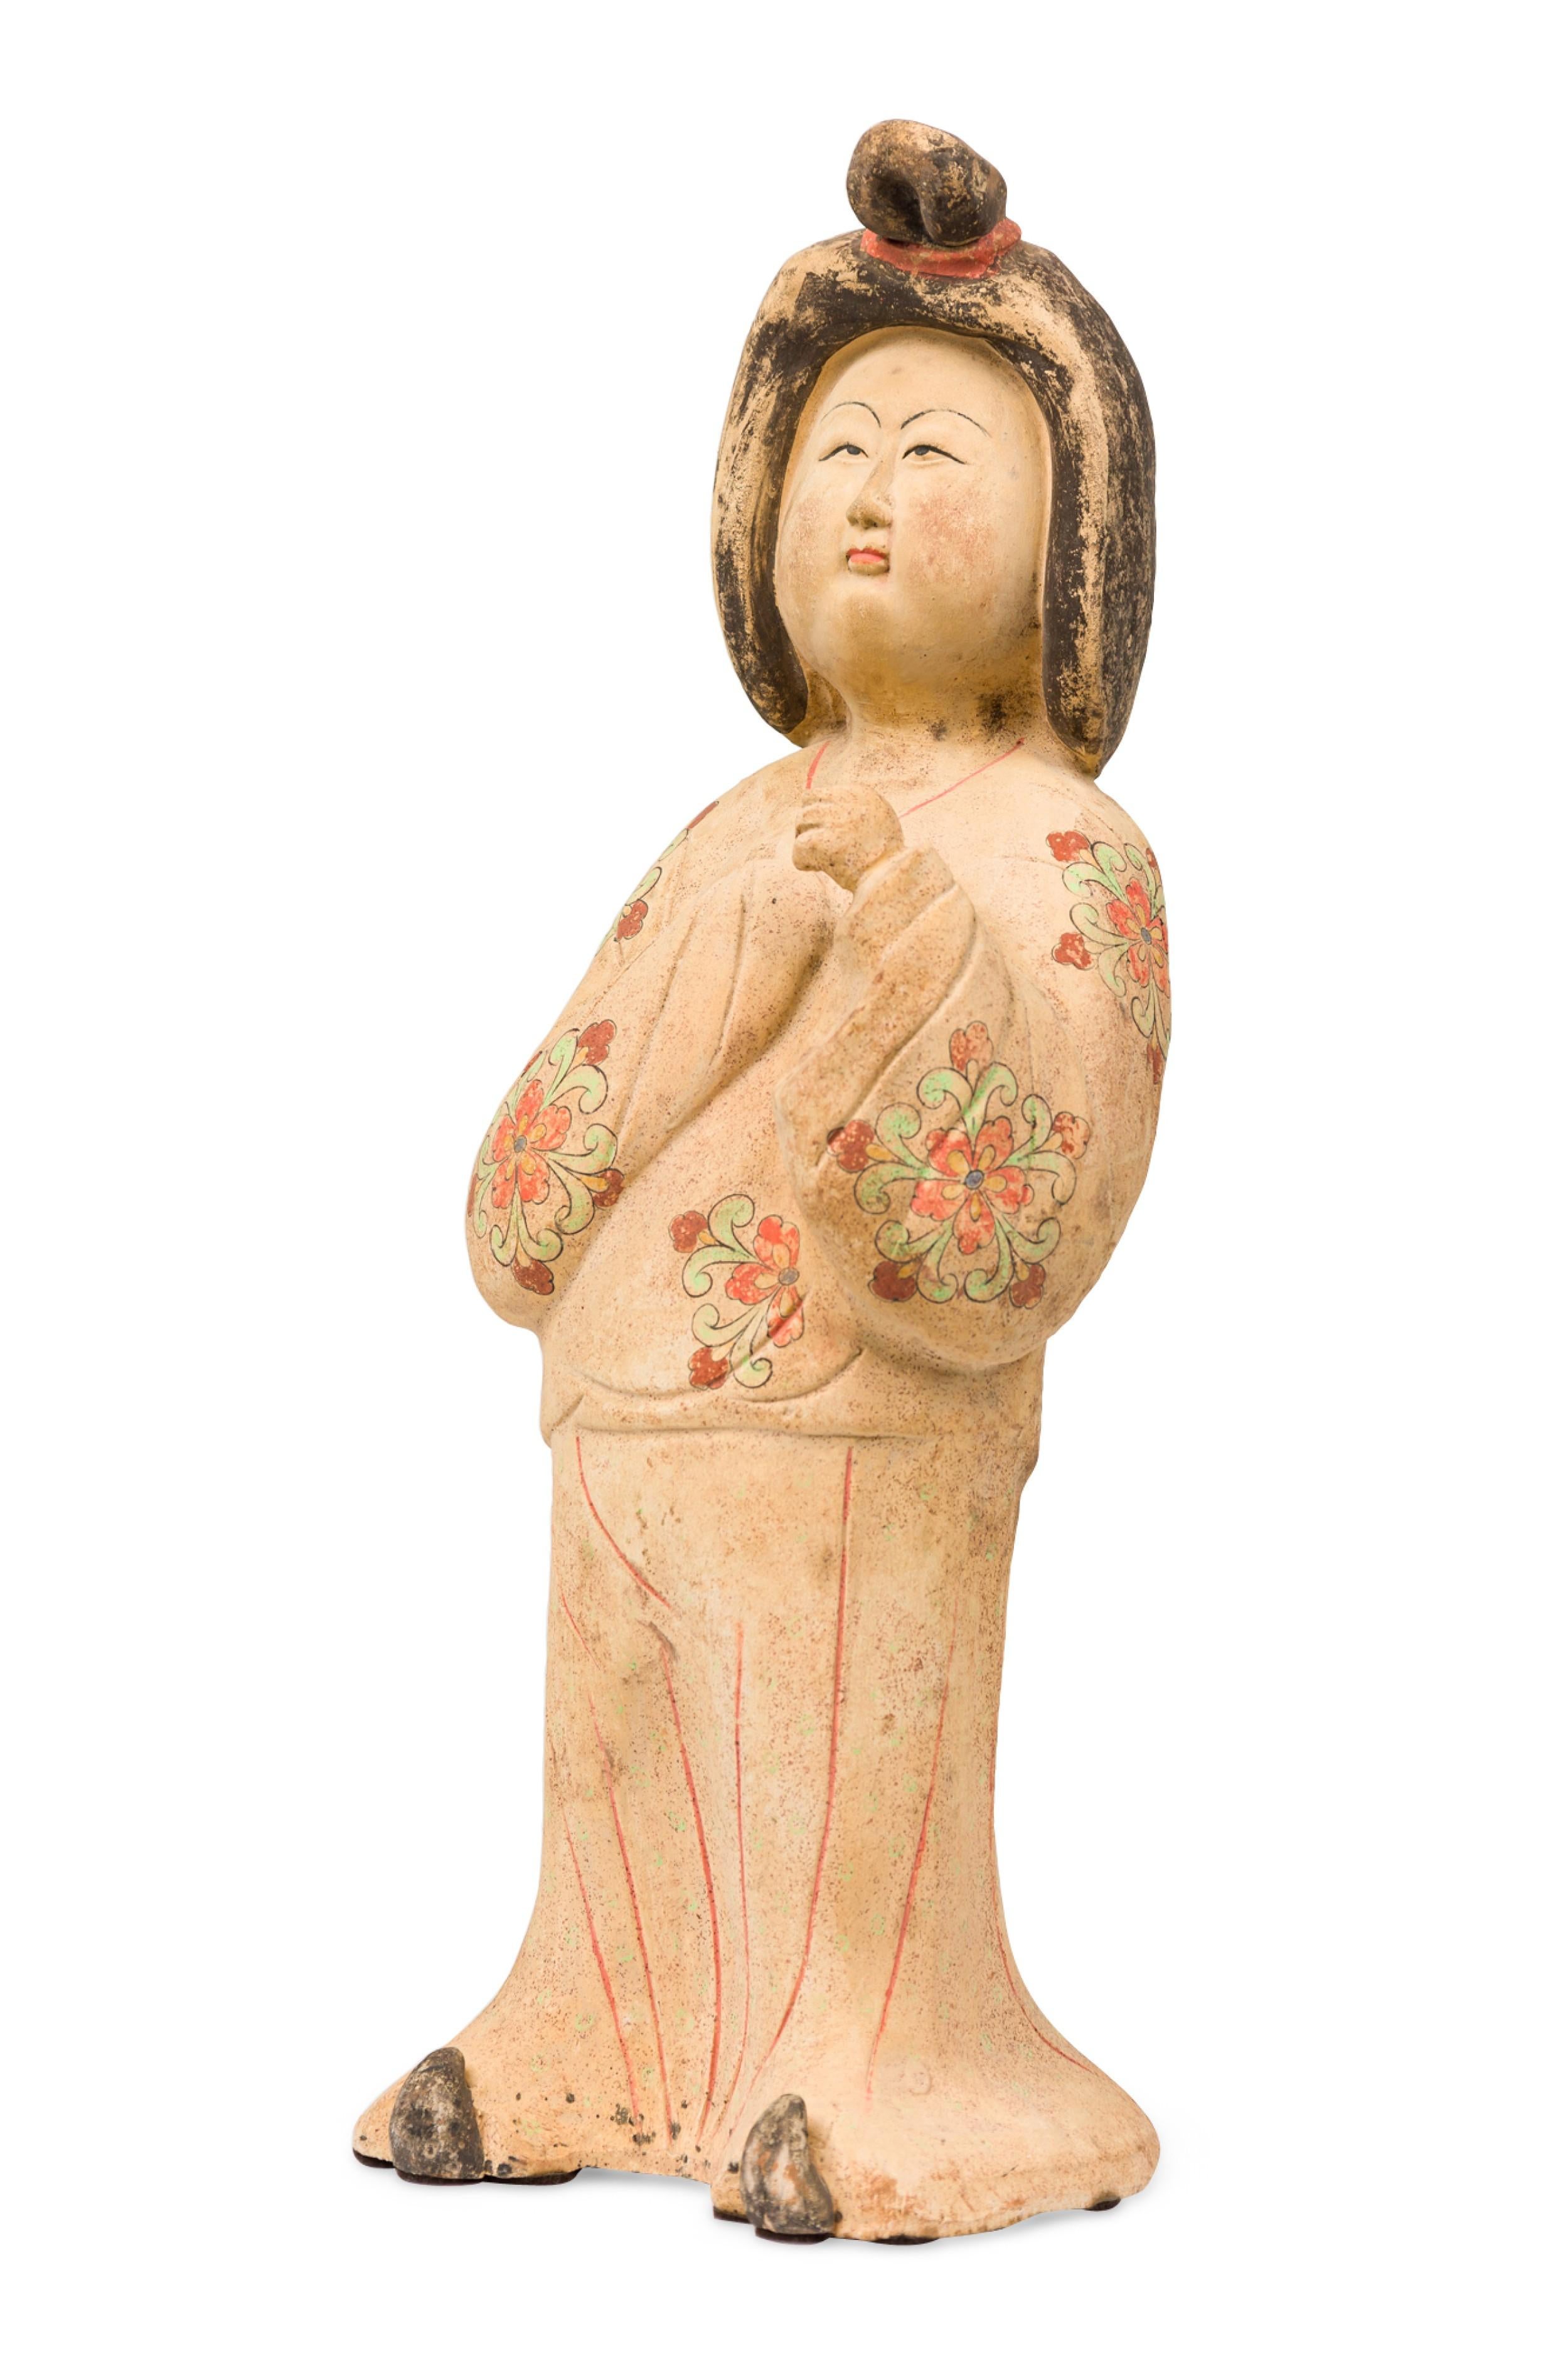 Chinese molded, unglazed beige ceramic figure depicts the stylized Buddhist Goddess posed in a billowy robe with a painted floral pattern, a peaceful smiling facial expression, her left arm raised as if in thought, with upturned slippers peeking out